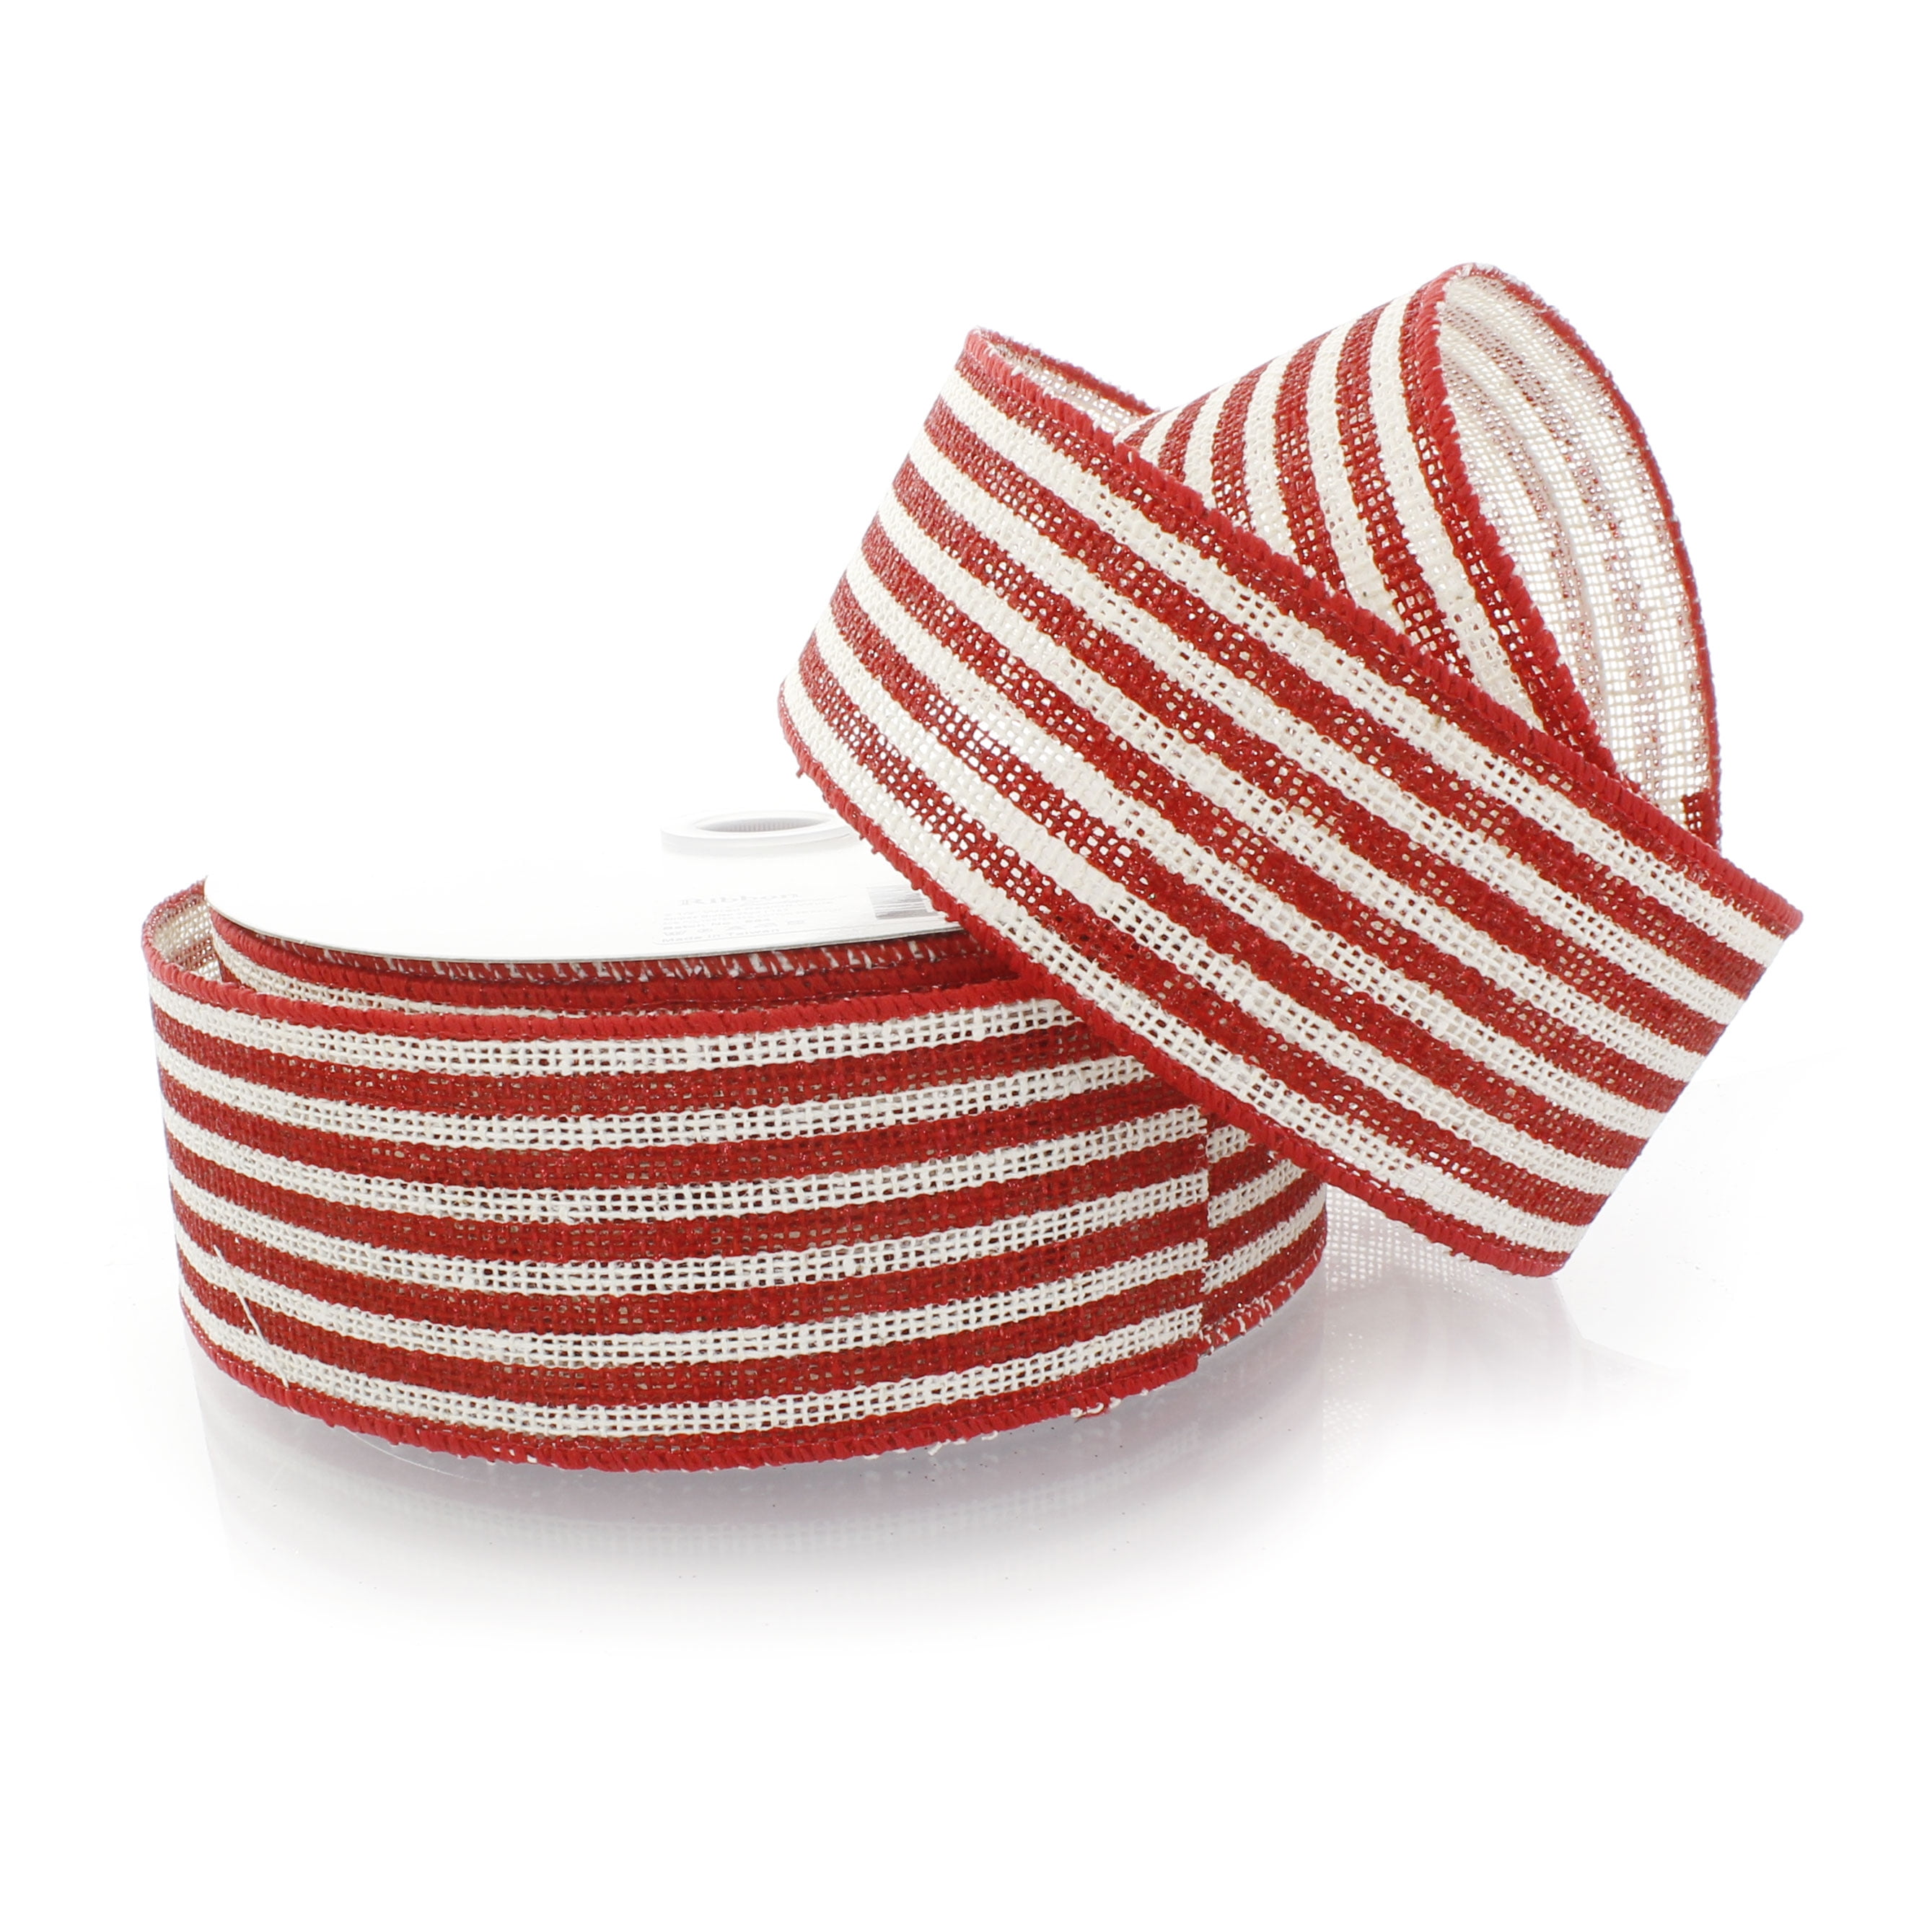 Grain Sack Ribbon Red and Beige Striped Ribbon Ticking Ribbon Feed Sack Burlap  Ribbon 3/4 Inches Wide Ticking Ribbon 5 Yd Roll 